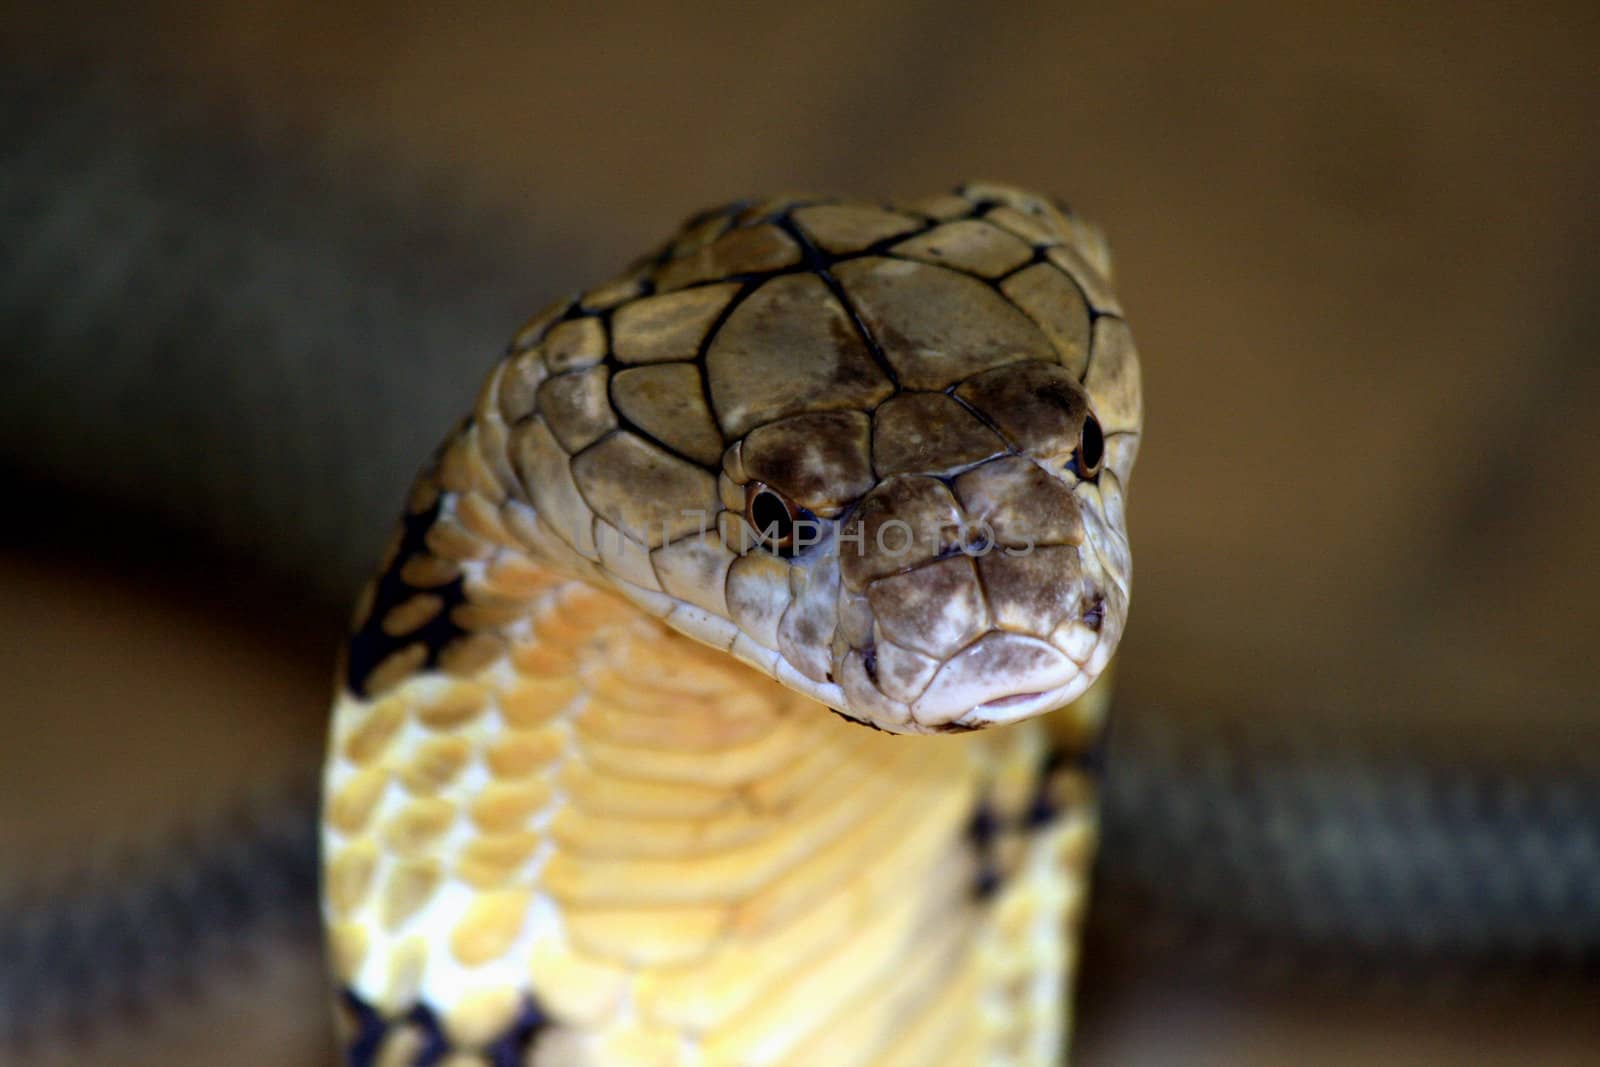 The mighty king cobra-One of the most poisonous snakes in the world.